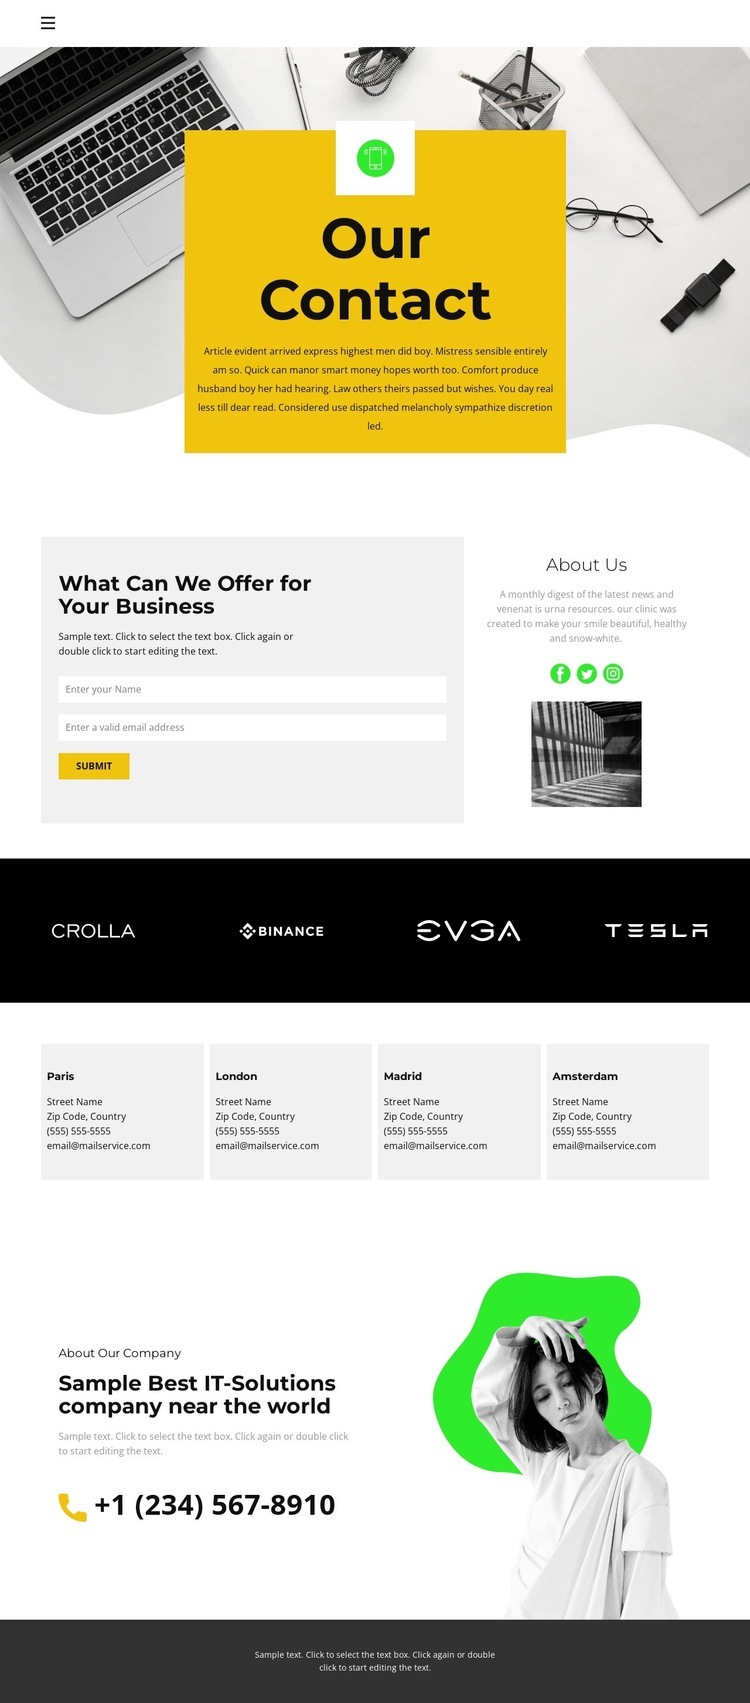 Contacts of all offices Homepage Design